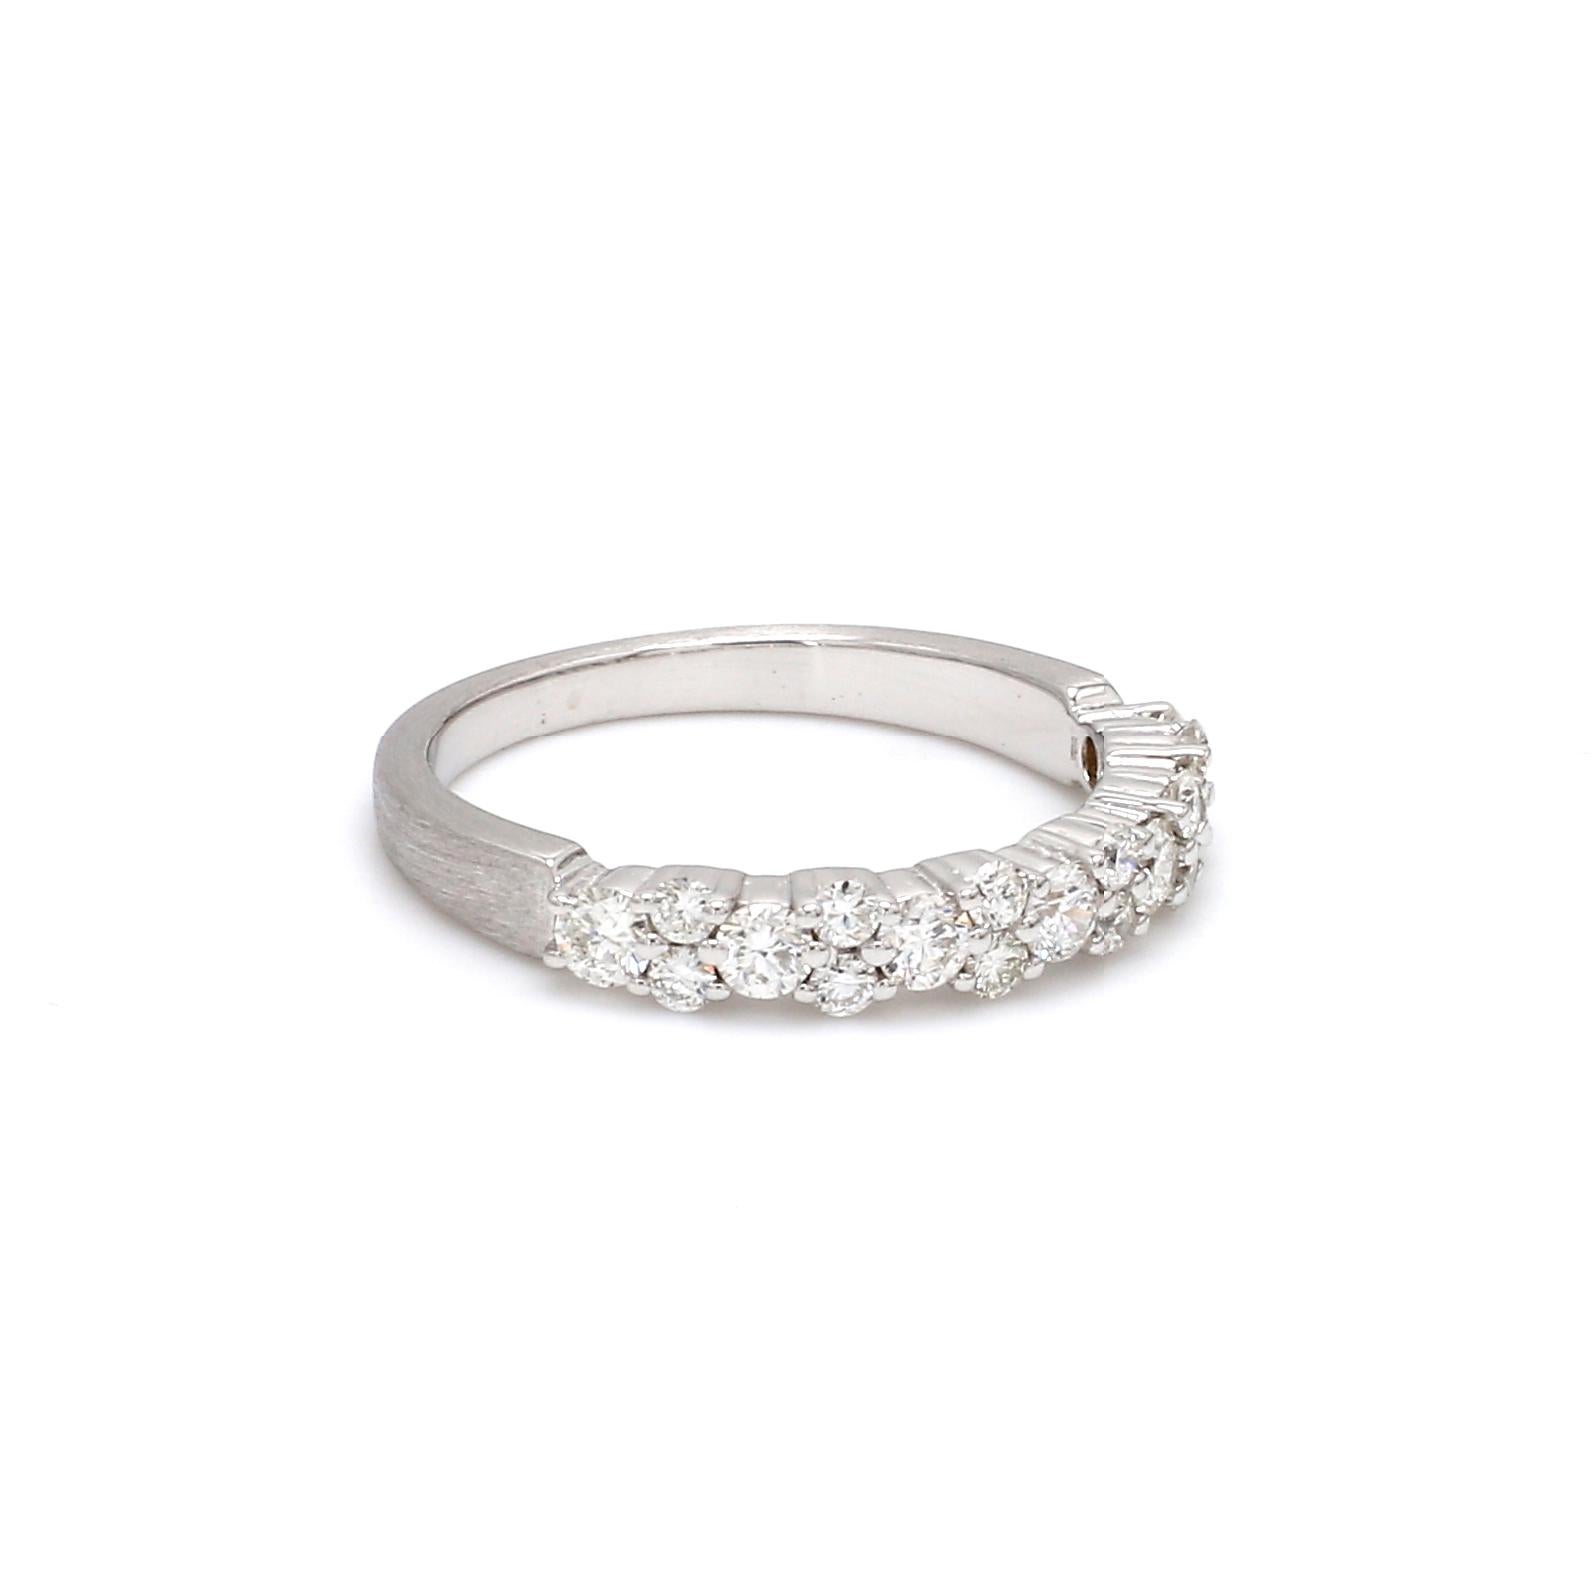 A Beautiful Handcrafted Ring in 18 Karat White Gold with Graduated Natural Brilliant Cut Round Diamond . A perfect Wedding Band for the Special occasion. The Band is finished in satin

Natural Diamond Details
Pieces :  19 Pieces
Weight : 0.68 Carat